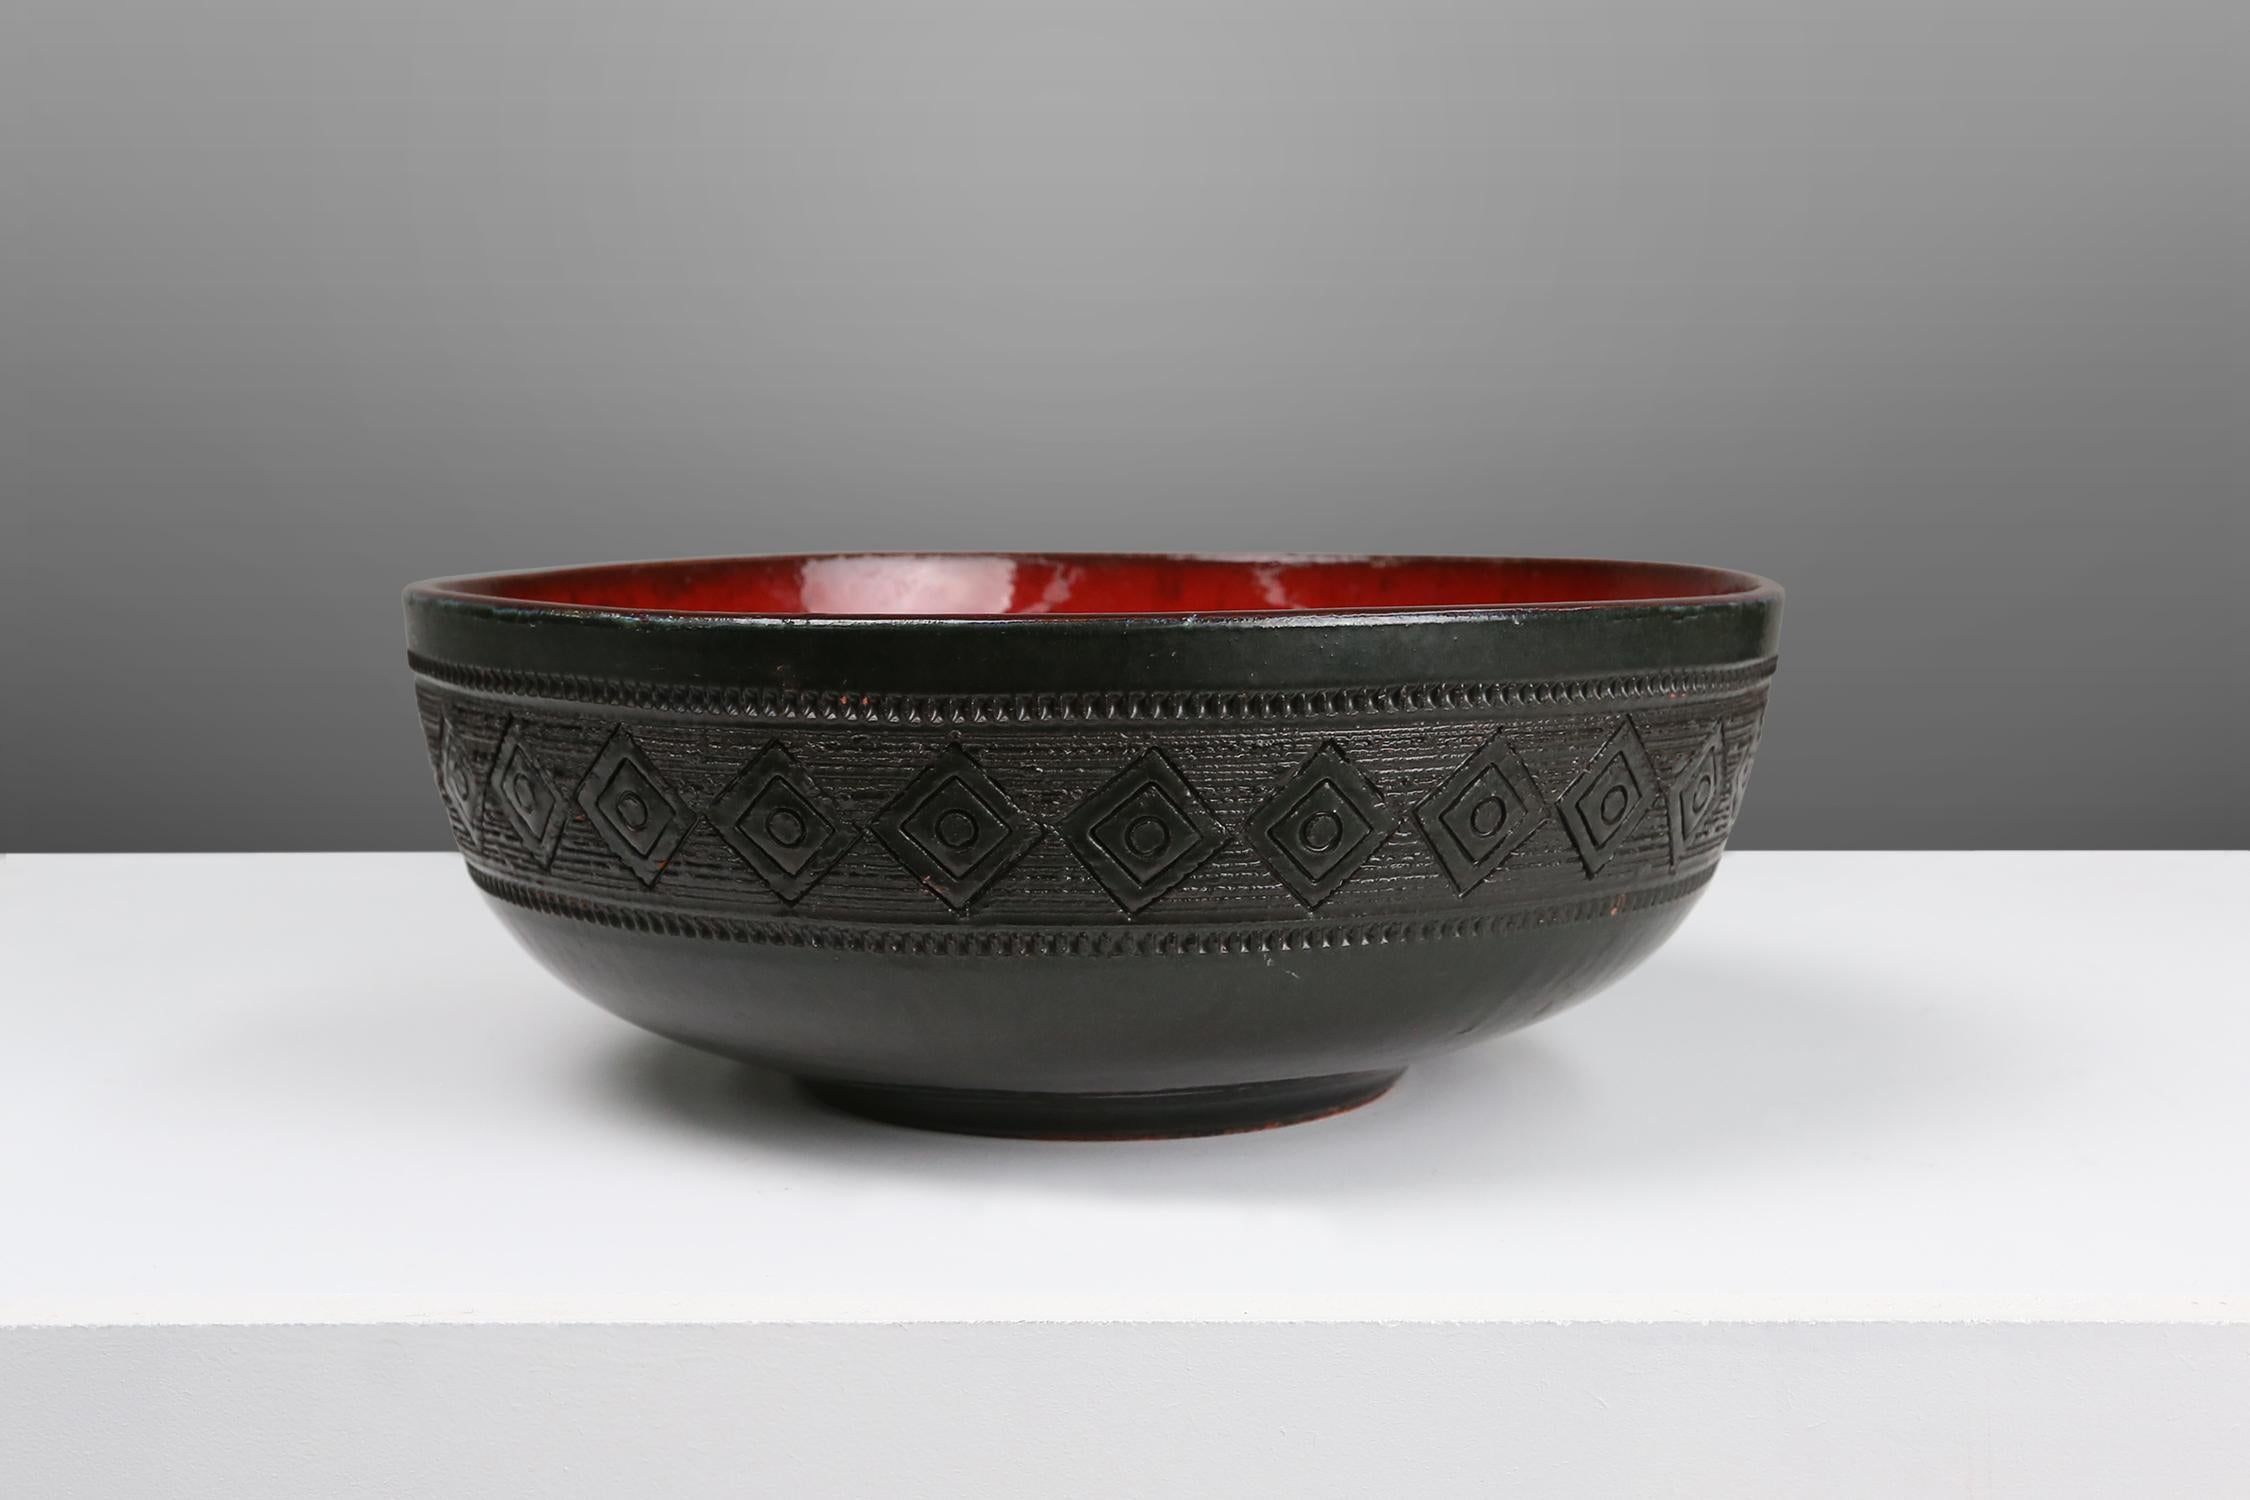 Bowl made by Rogier Vandeweghe for Amphora.
Has a amazing red glaze and are highly decorative. The outside is dark green.